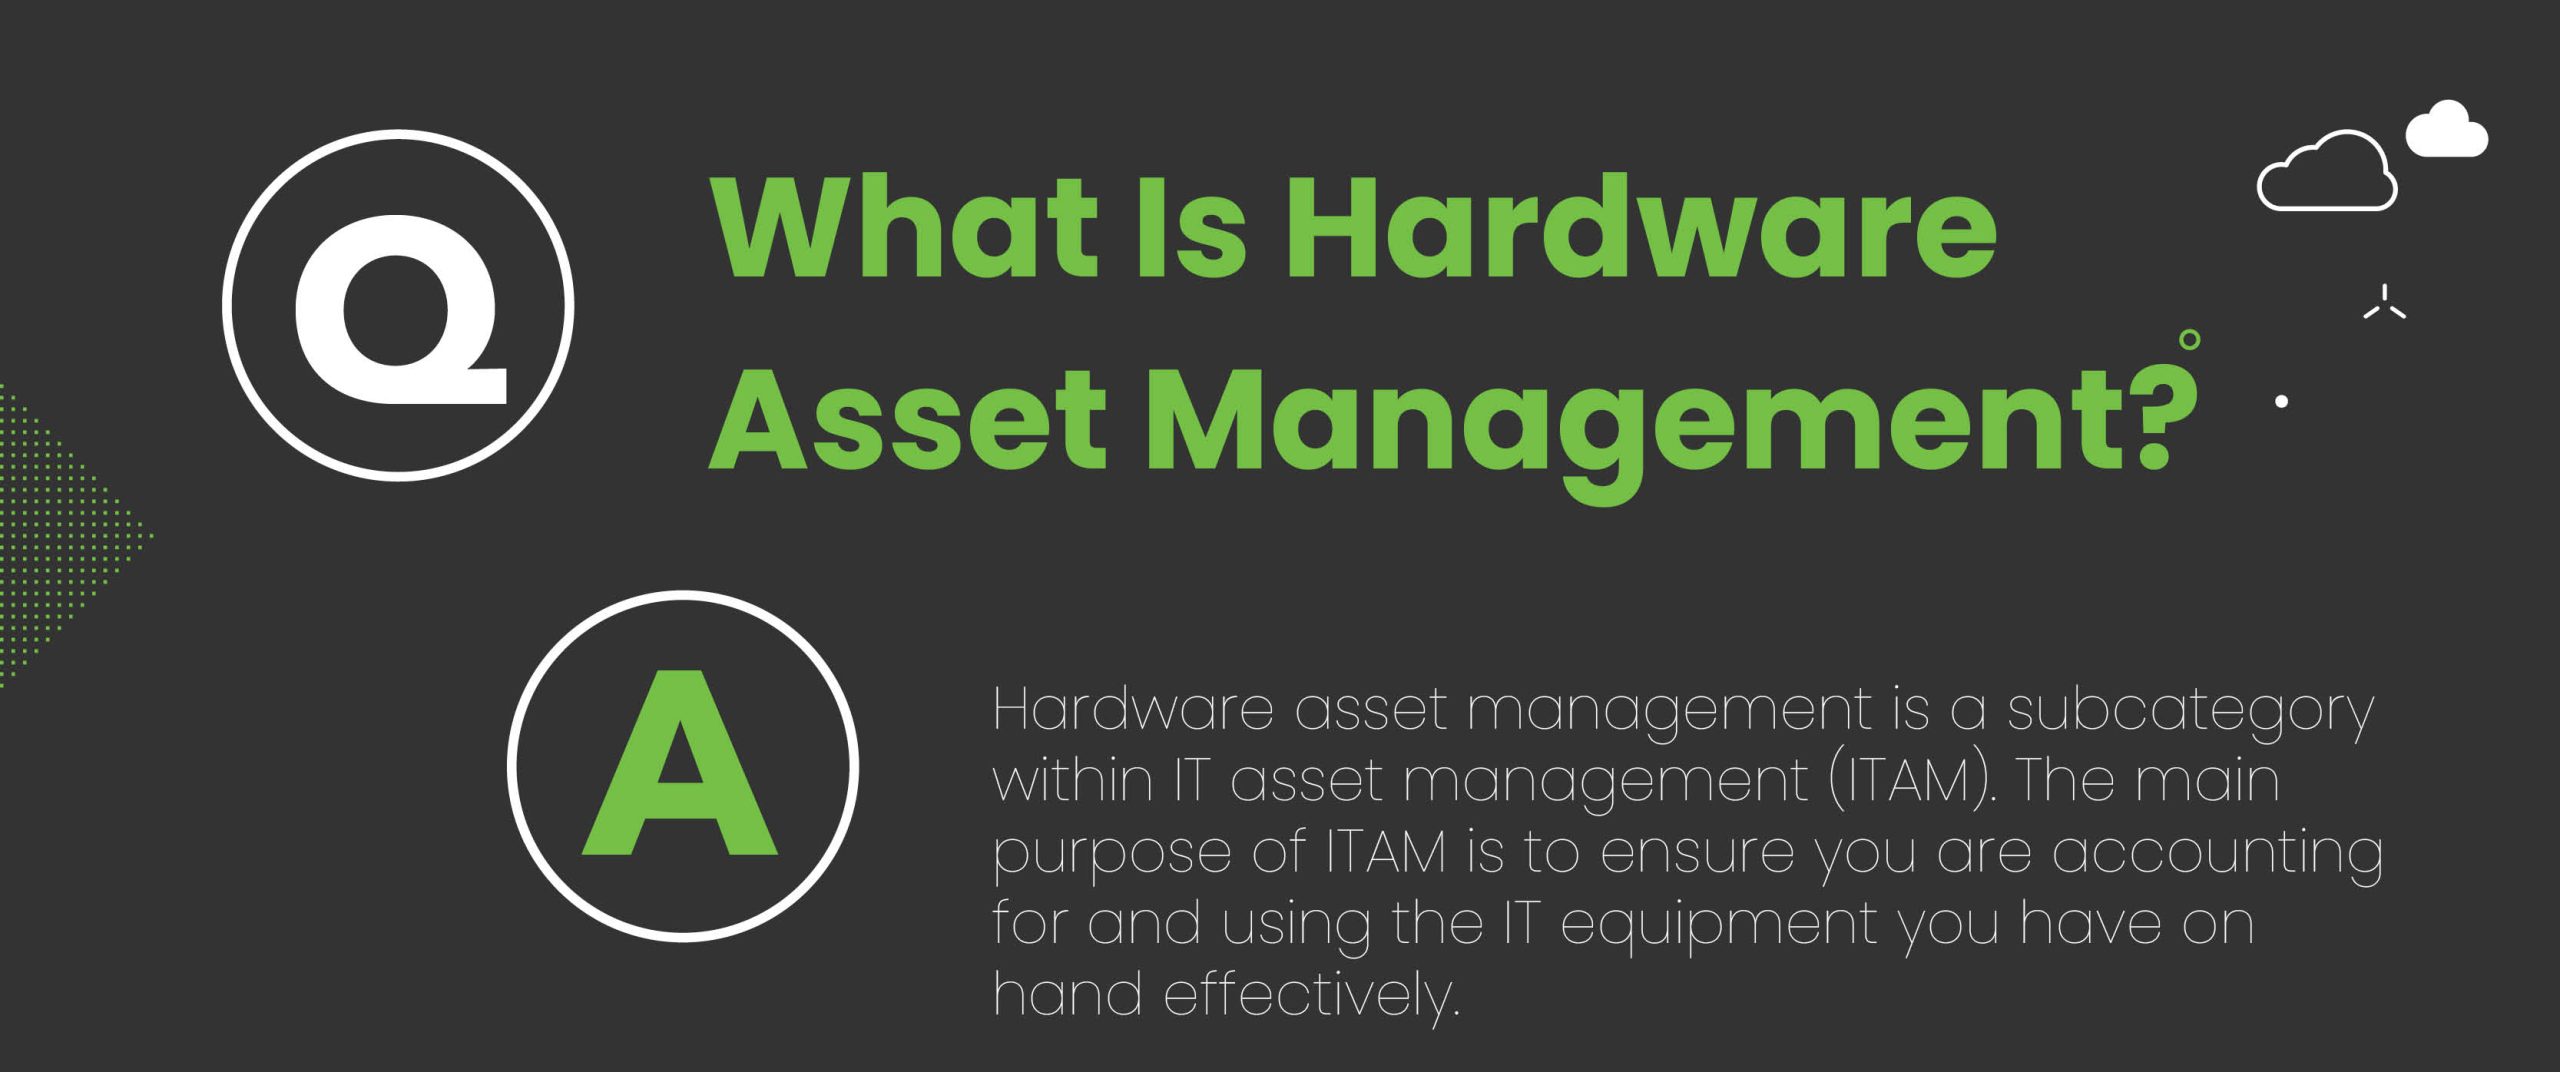 what is hardware asset management